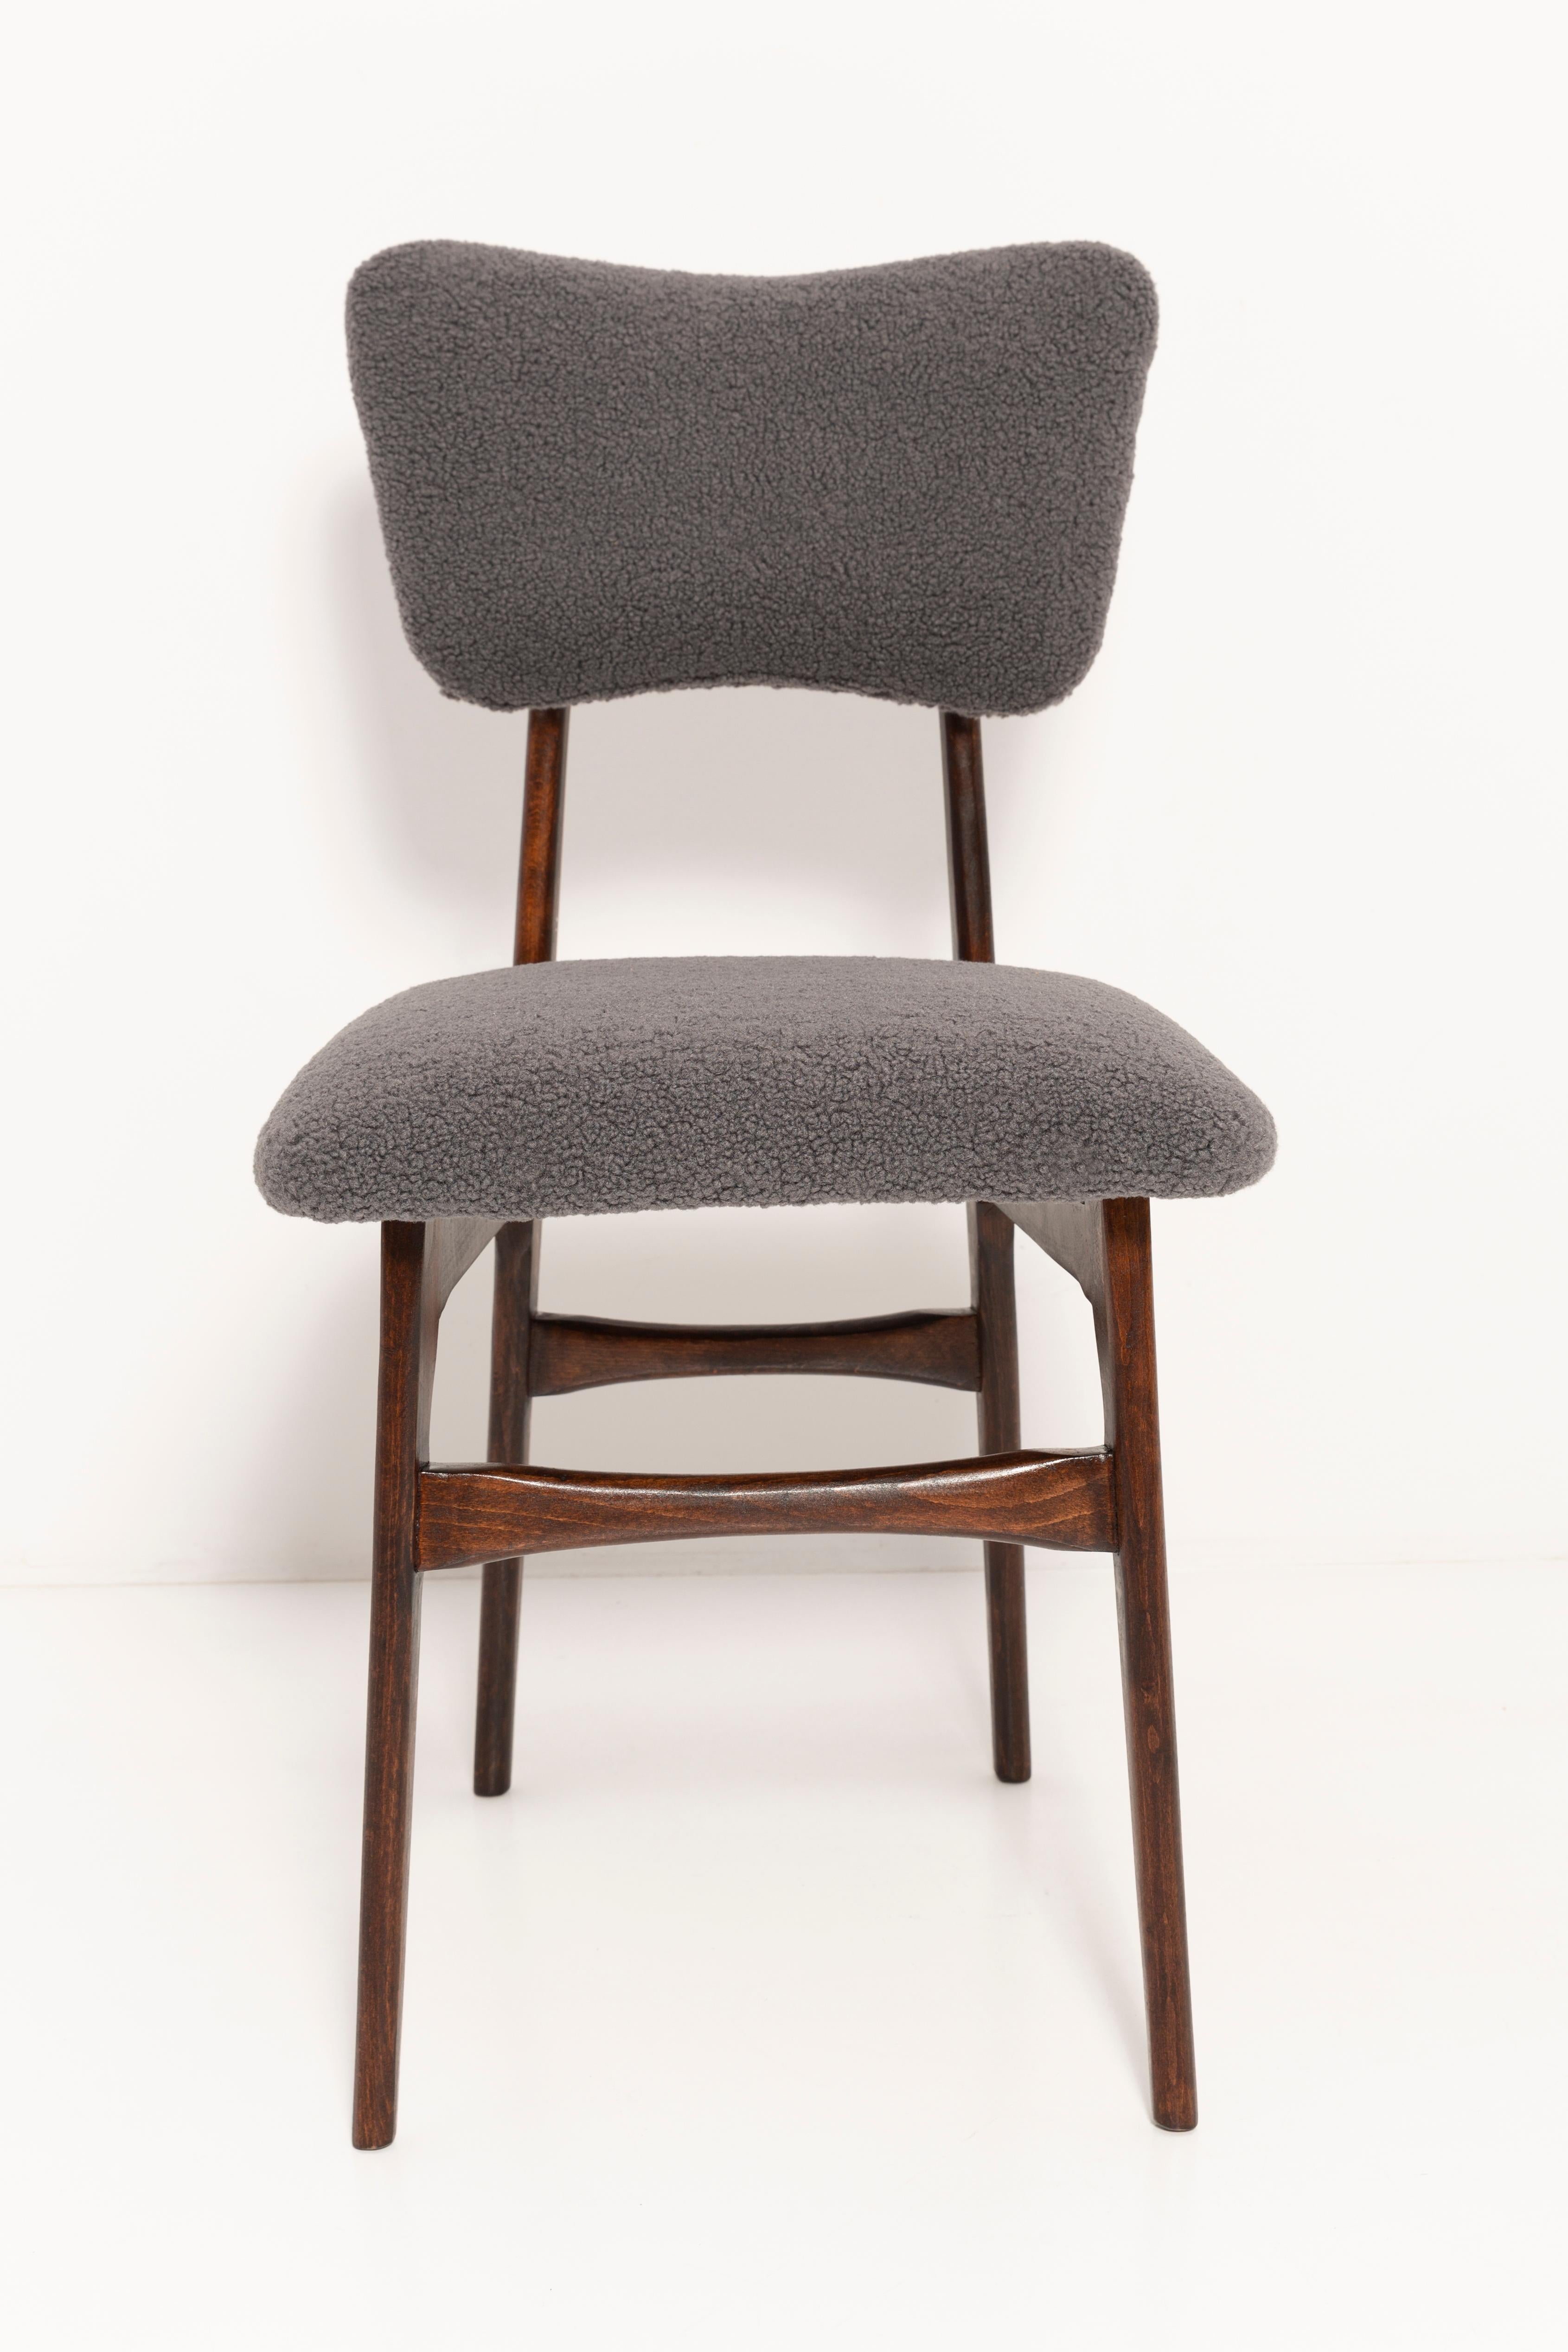 Four Mid-Century Dark Gray Boucle Butterfly Chairs, Europe, 1960s For Sale 3